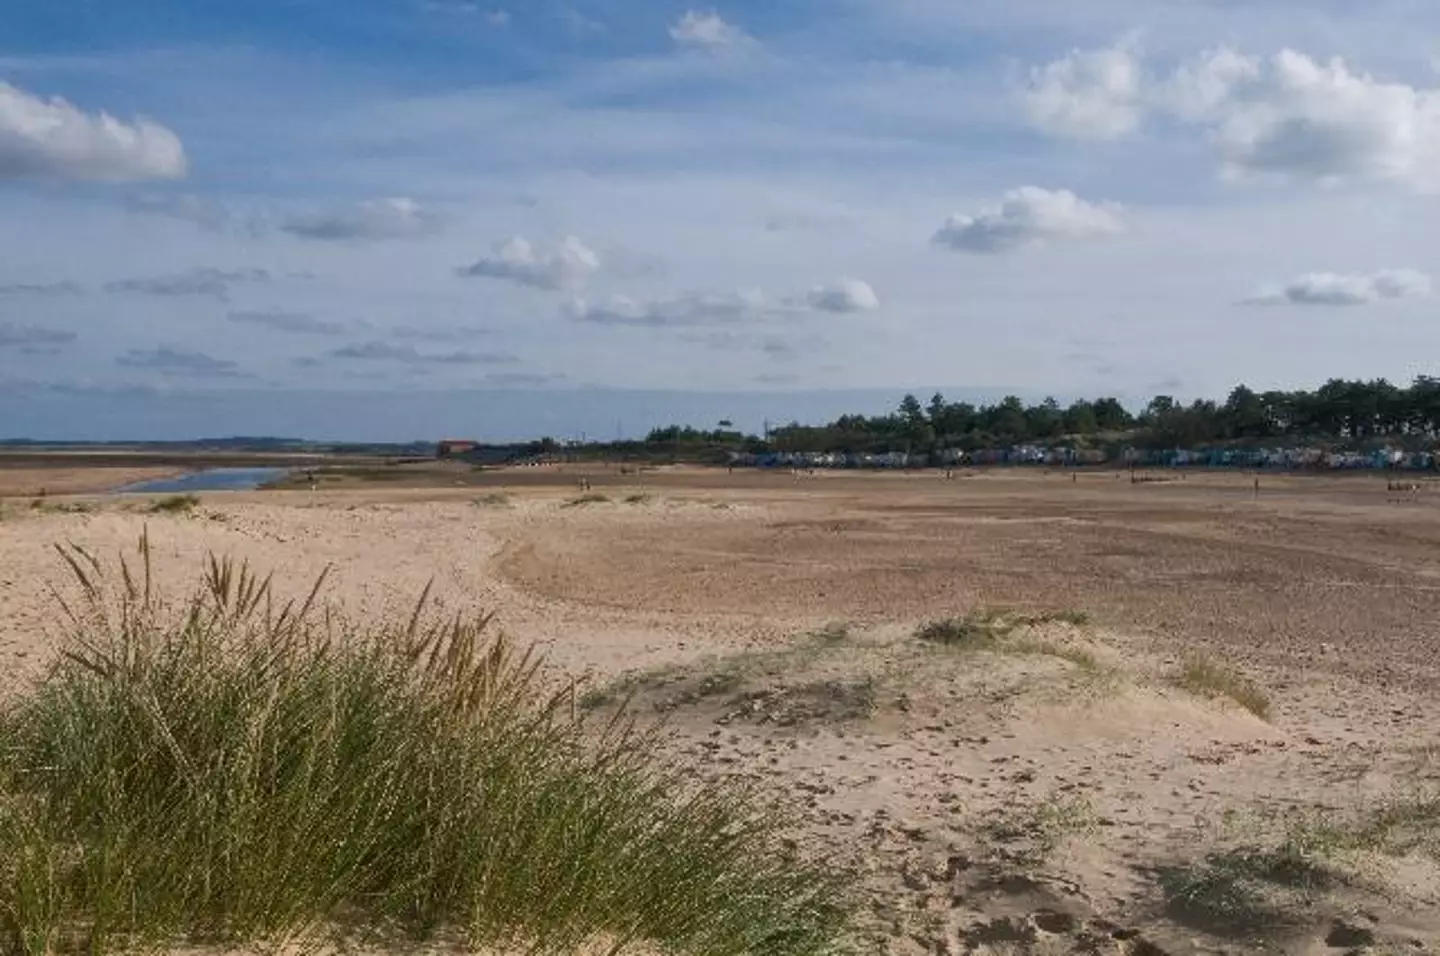 Brits are being told to avoid swimming in one UK beach.